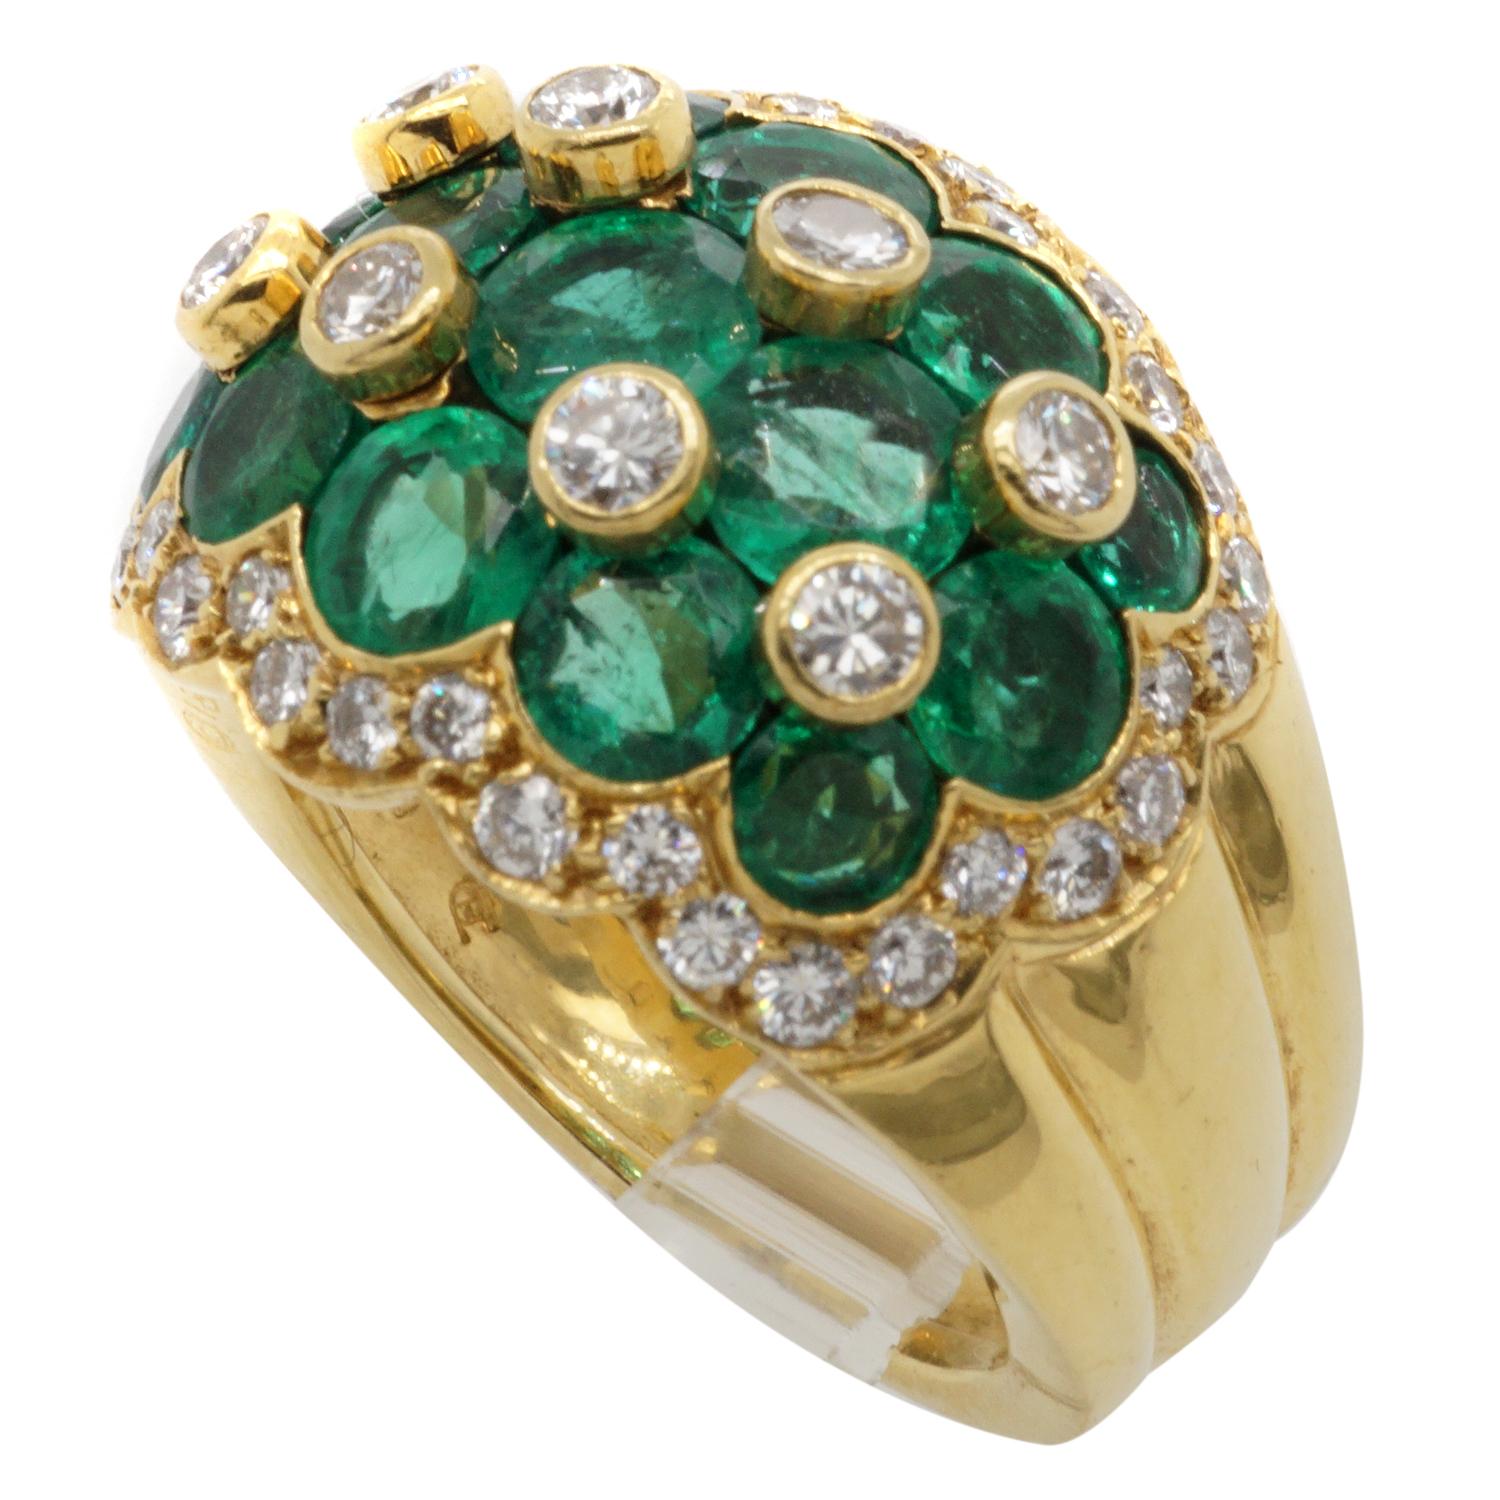 Van Cleef & Arpels Emerald Diamond 18 Karat yellow gold ring featuring 15 round modified brilliant cut vivid green emeralds and 44 round brilliant cut diamonds.  Signed Van Cleef & Arpels N.Y. 56393 stamped 18k 750 with hallmarks.  Ring size 7. 